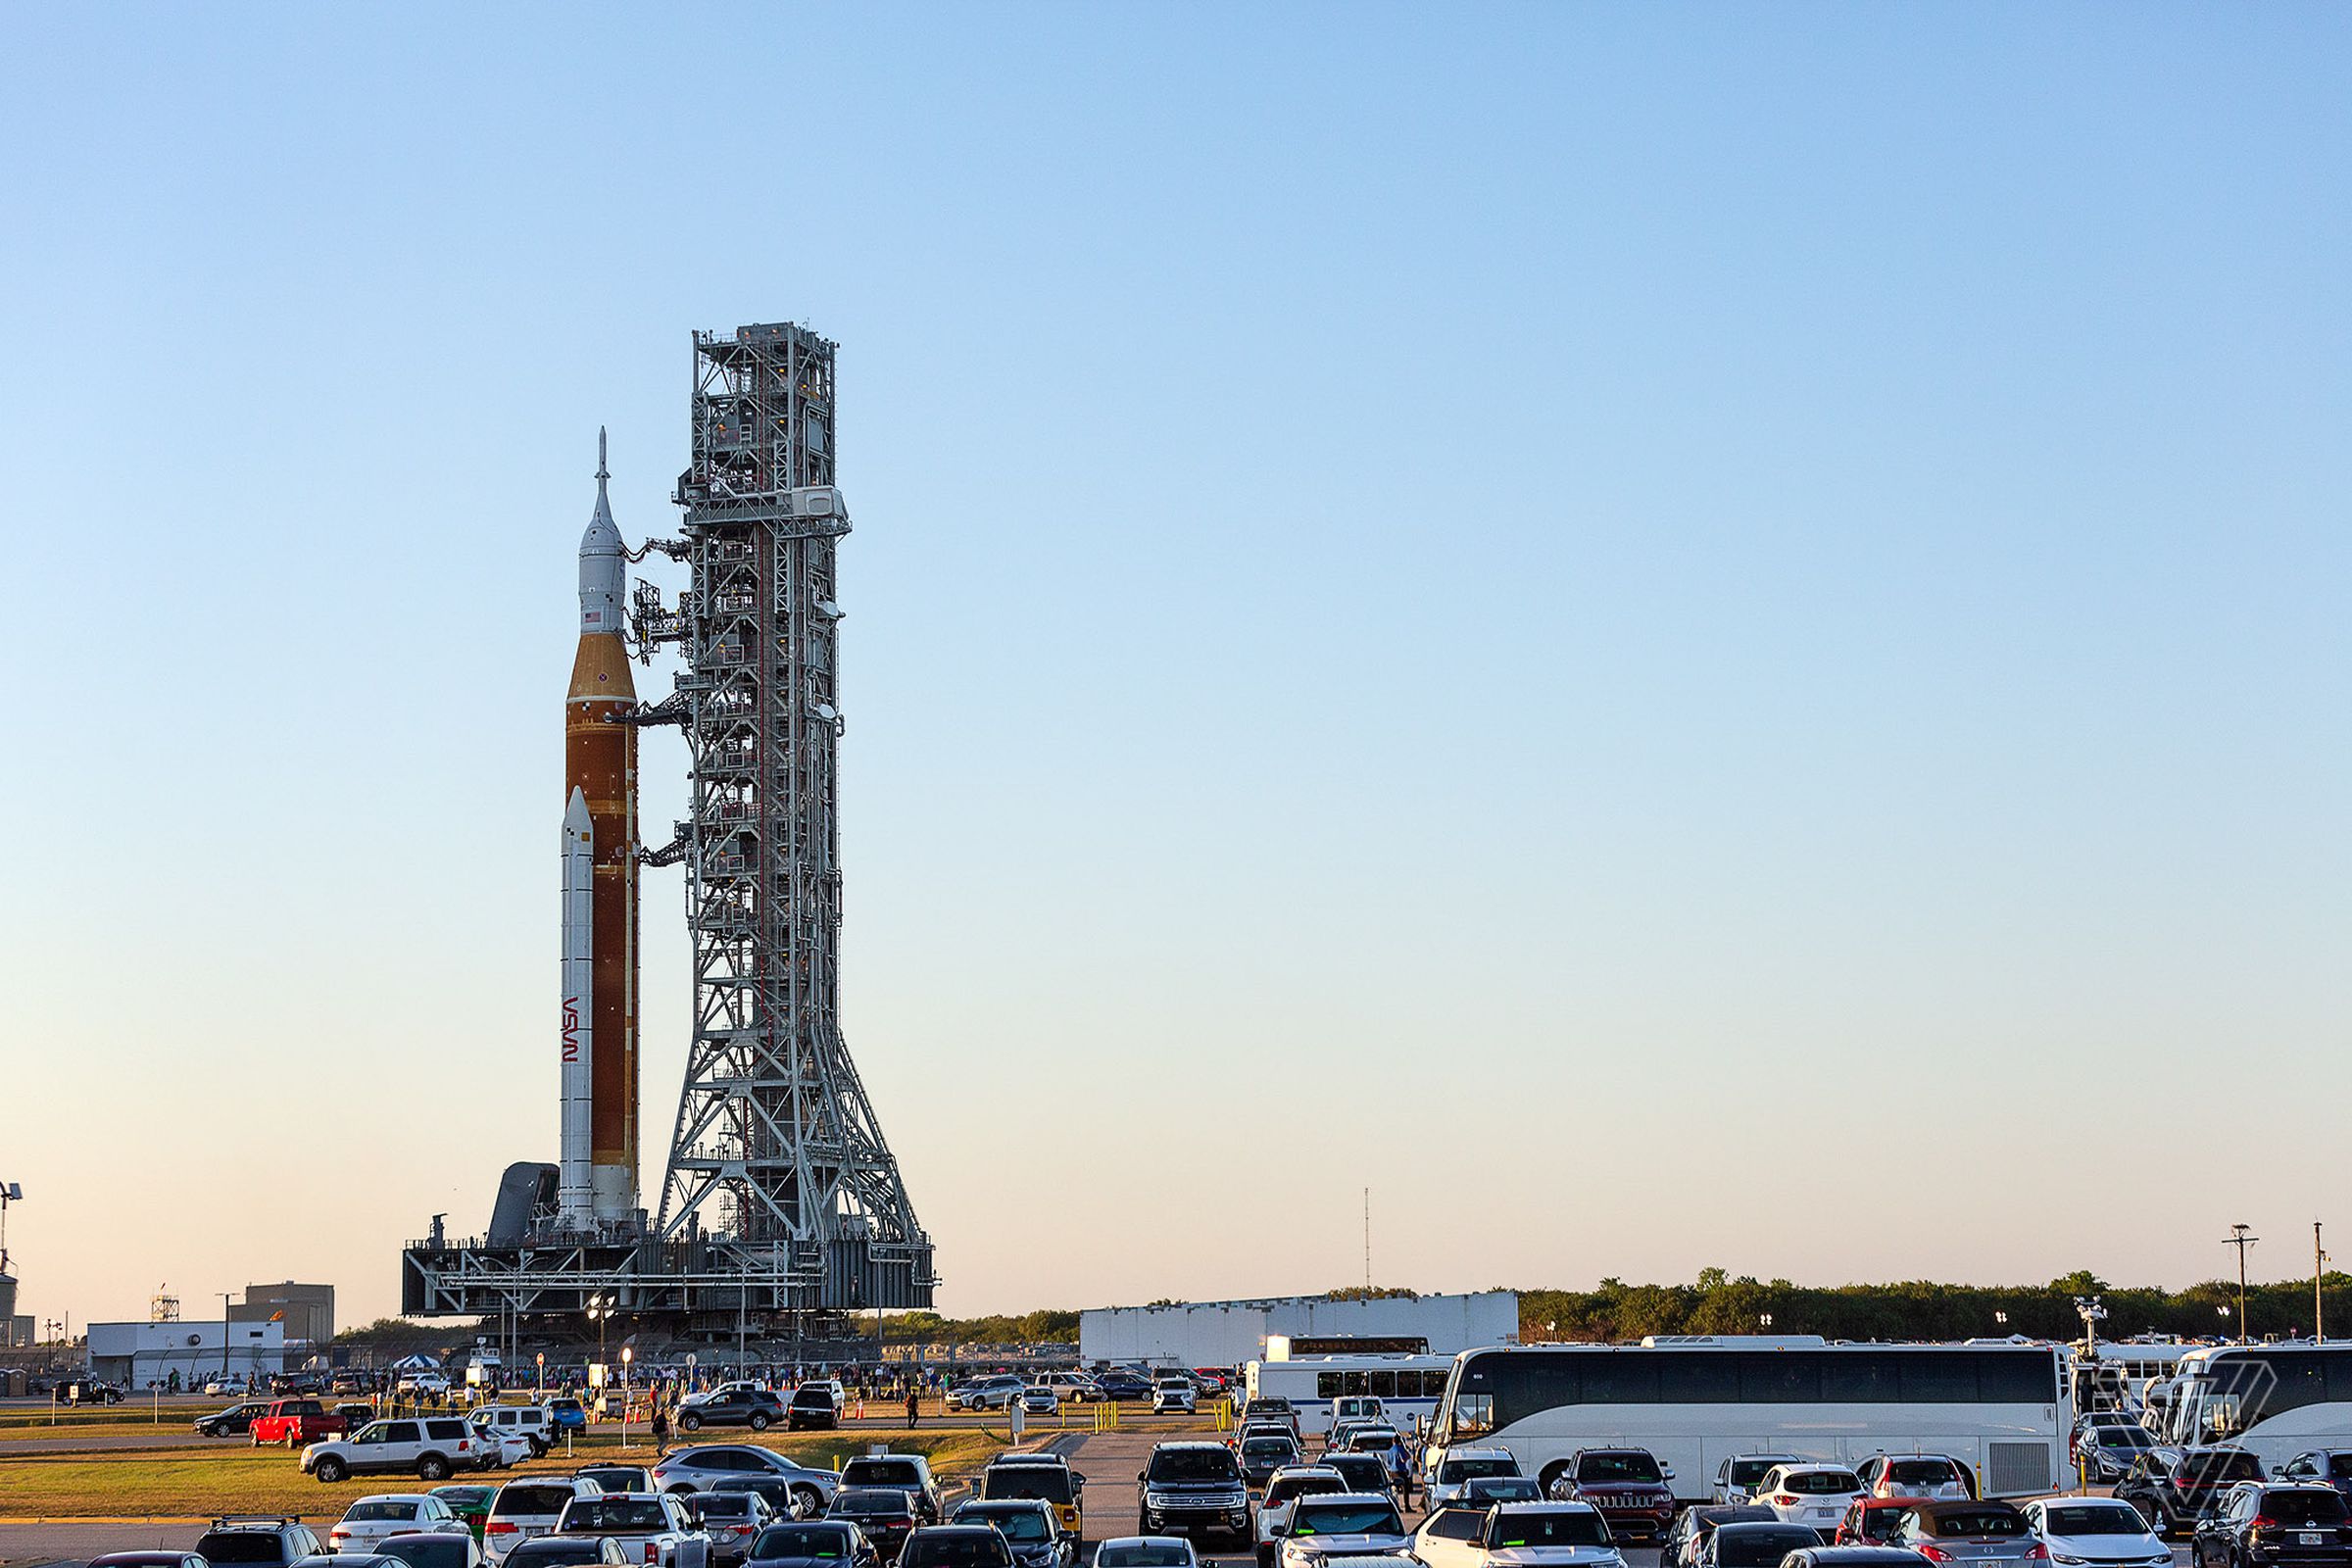 The SLS on the mobile launch platform as the sun sets